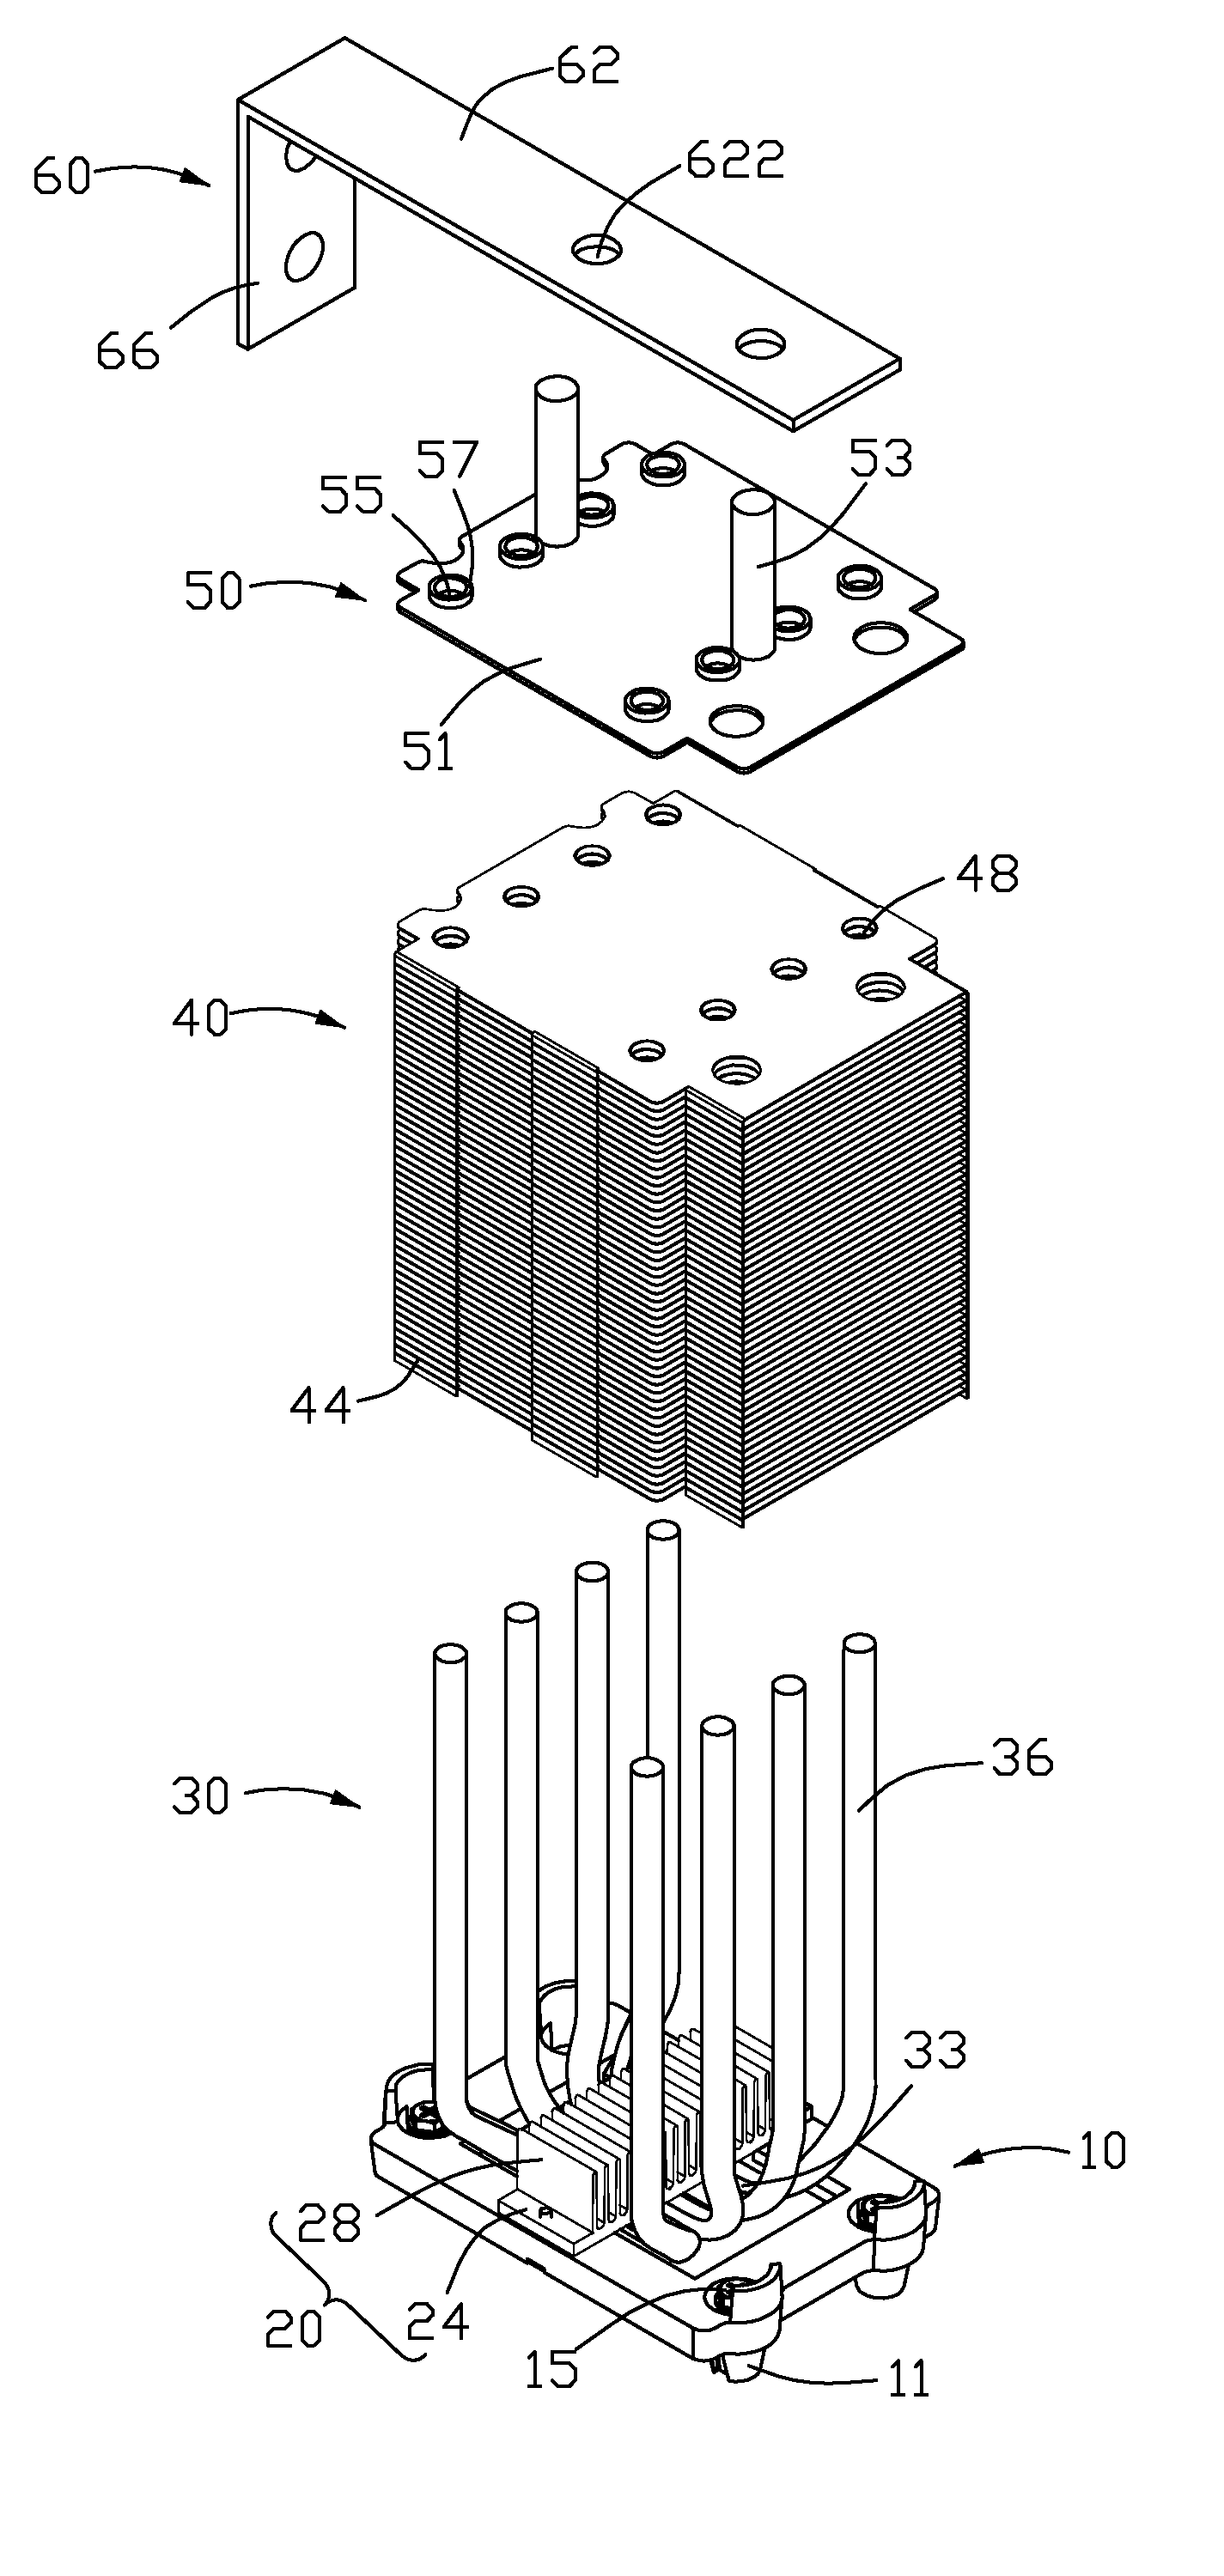 Electronic system with a heat sink assembly